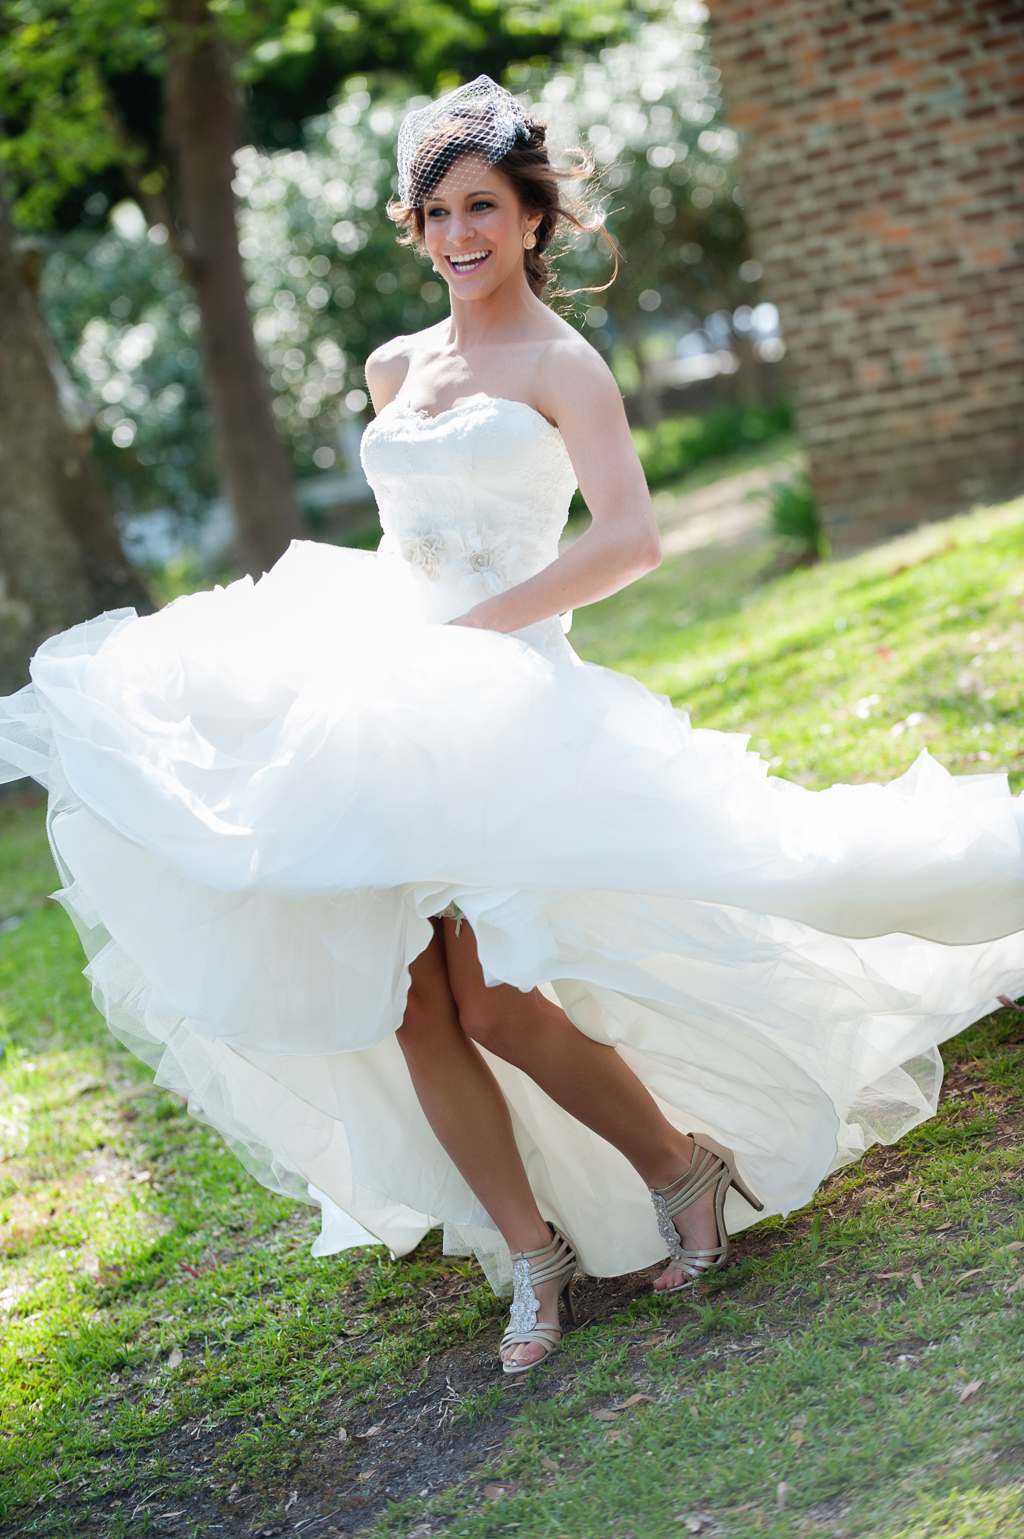 bride swings up wedding dress excitedly as she dances in yard